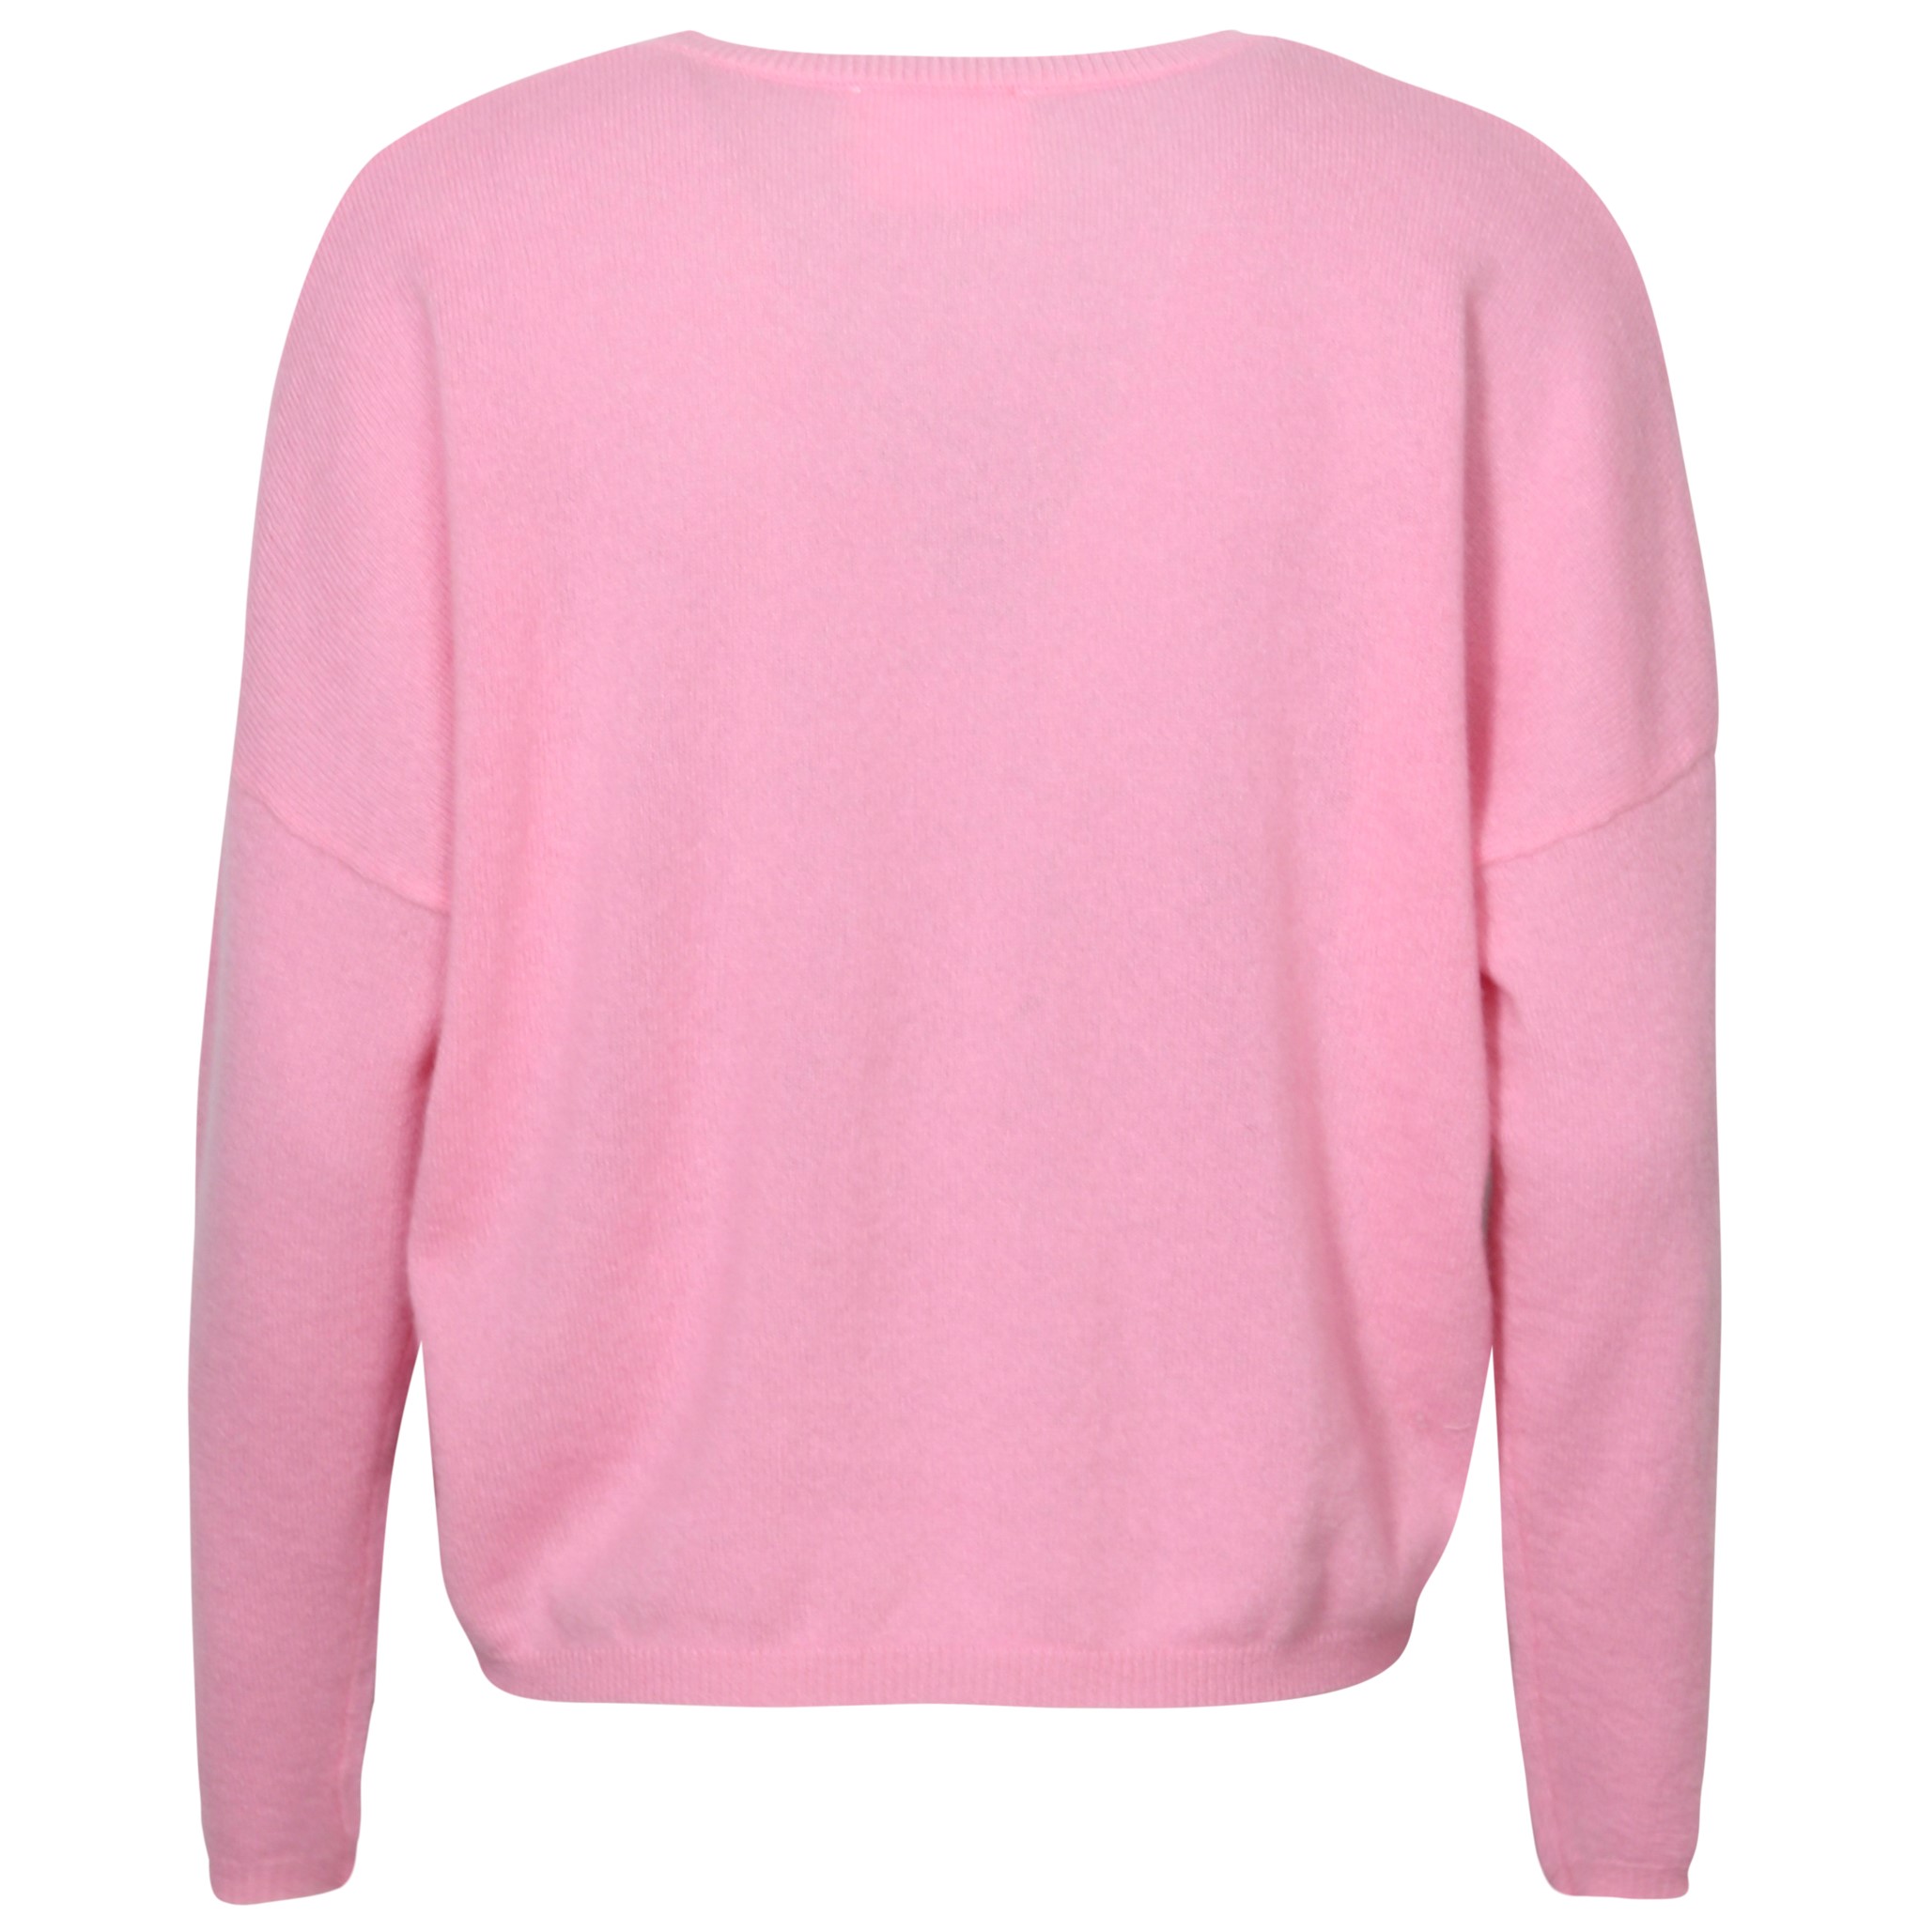 ABSOLUT CASHMERE Round Neck Sweater Kaira in Light Pink XS